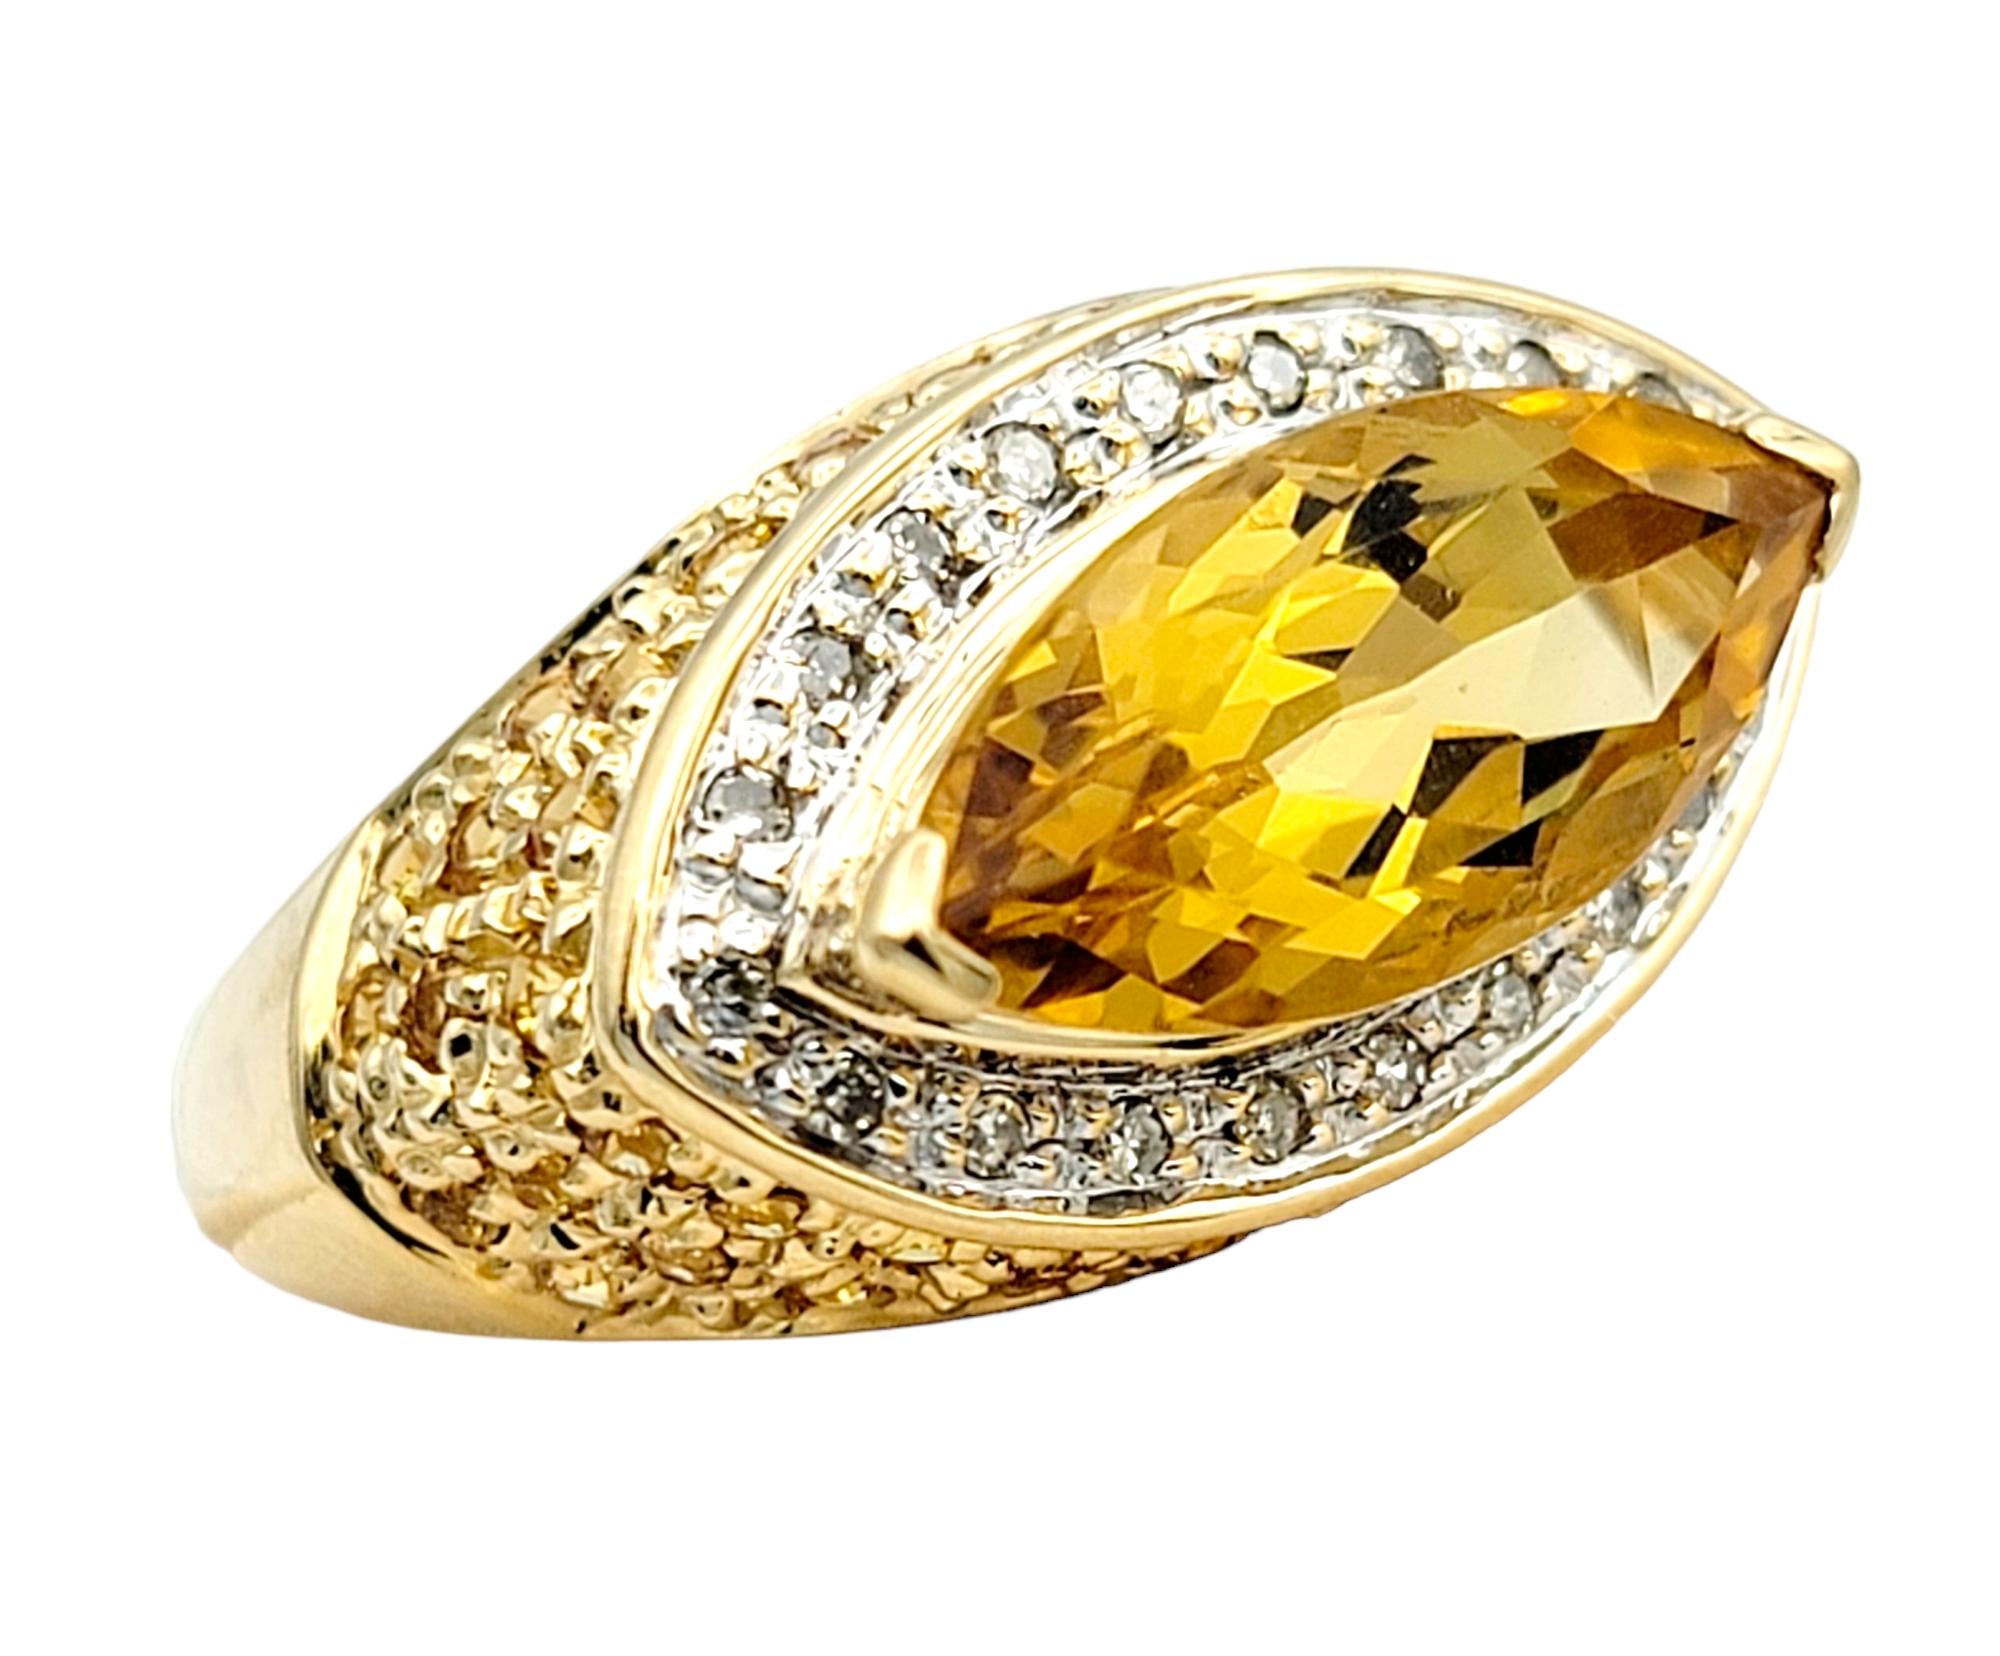 Ring size: 6

This gorgeous citrine, sapphire and diamond ring fills the finger from end to end with warmth and radiance. The 14 karat yellow gold provides a warm backdrop that highlights the gemstones' rich tones, making the piece absolutely